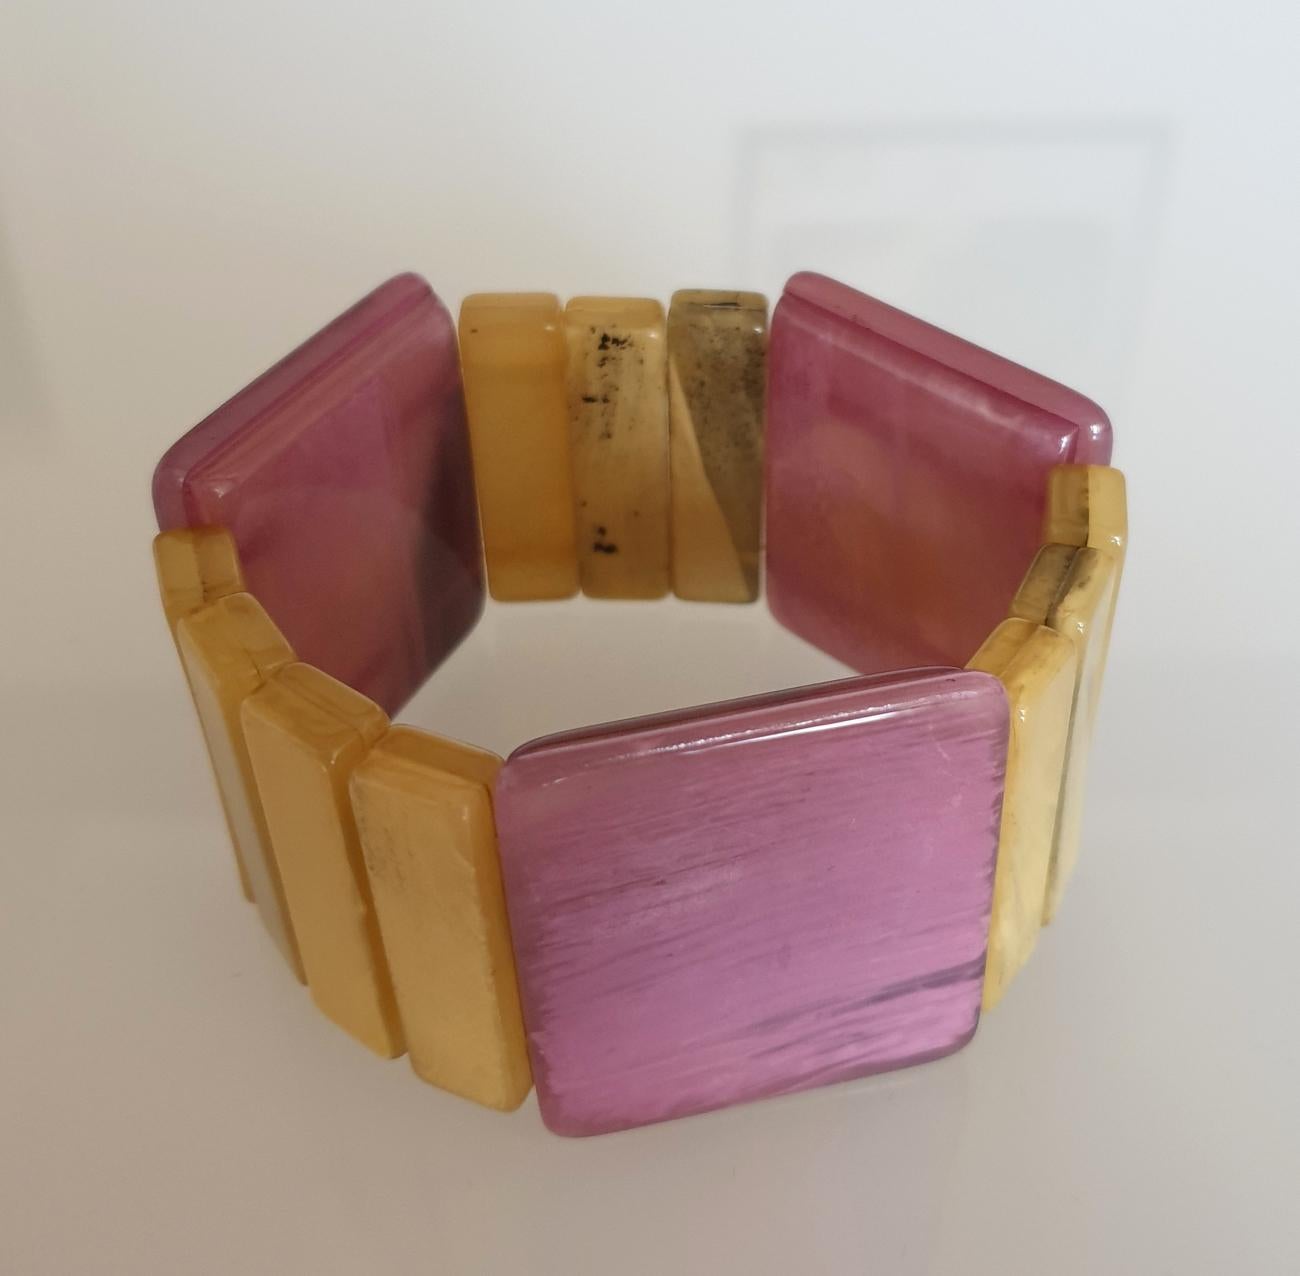 Mid Century Bakelite bracelet, France circa 1970s.
Some black veins on the Bakelite.
The Purple elements are a little higher than the yellow ones, 
giving a lot of style to the bracelet.
Excellent condition.